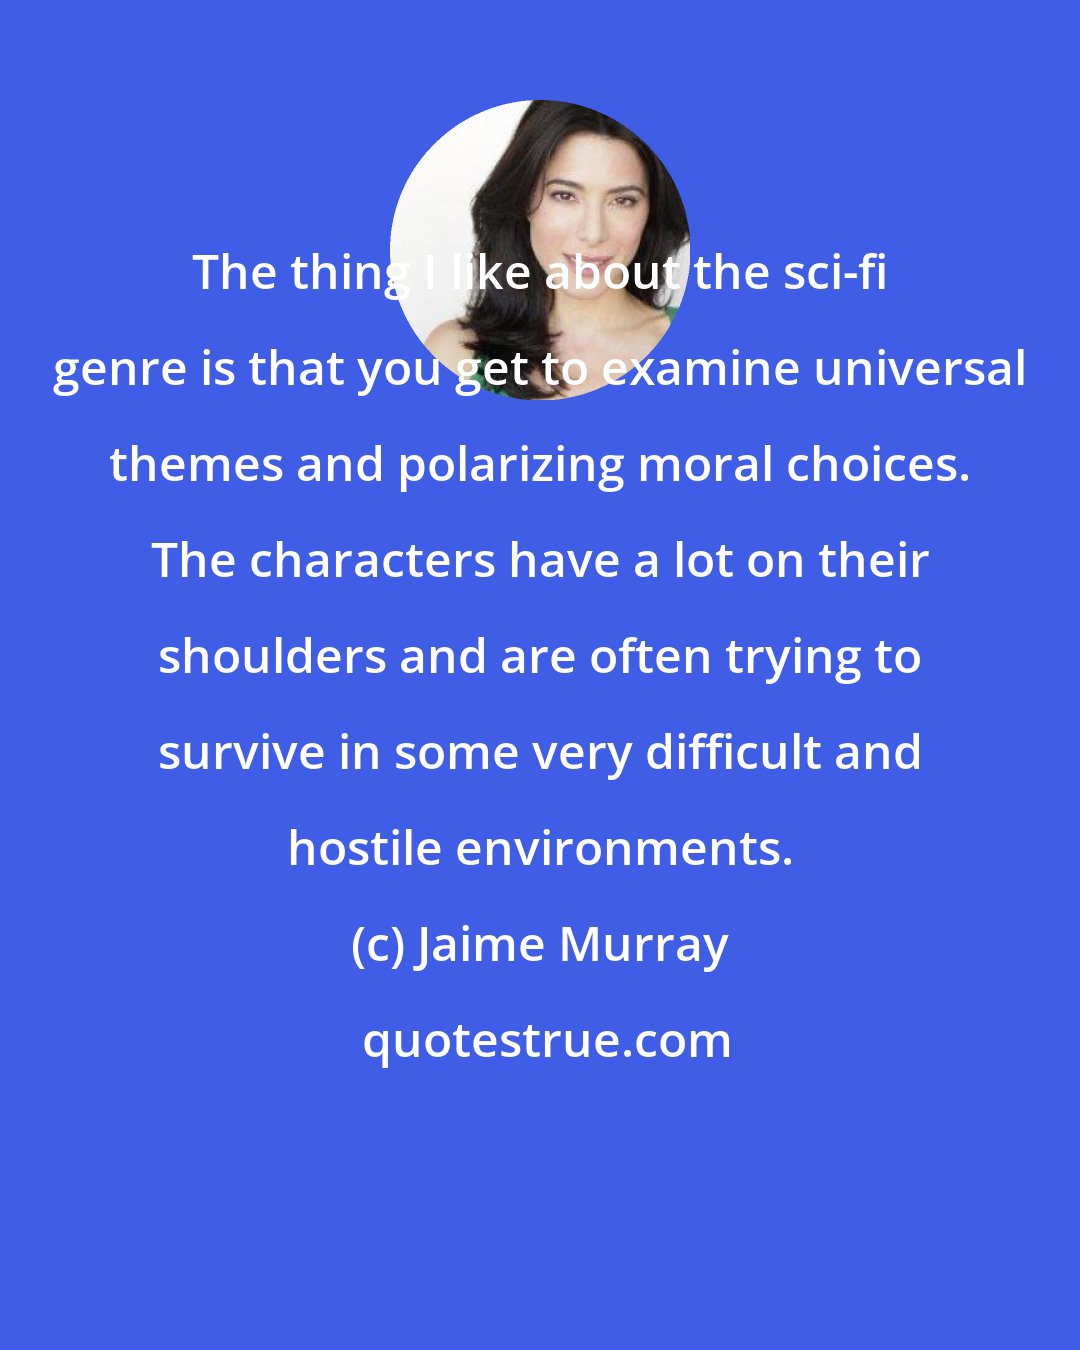 Jaime Murray: The thing I like about the sci-fi genre is that you get to examine universal themes and polarizing moral choices. The characters have a lot on their shoulders and are often trying to survive in some very difficult and hostile environments.